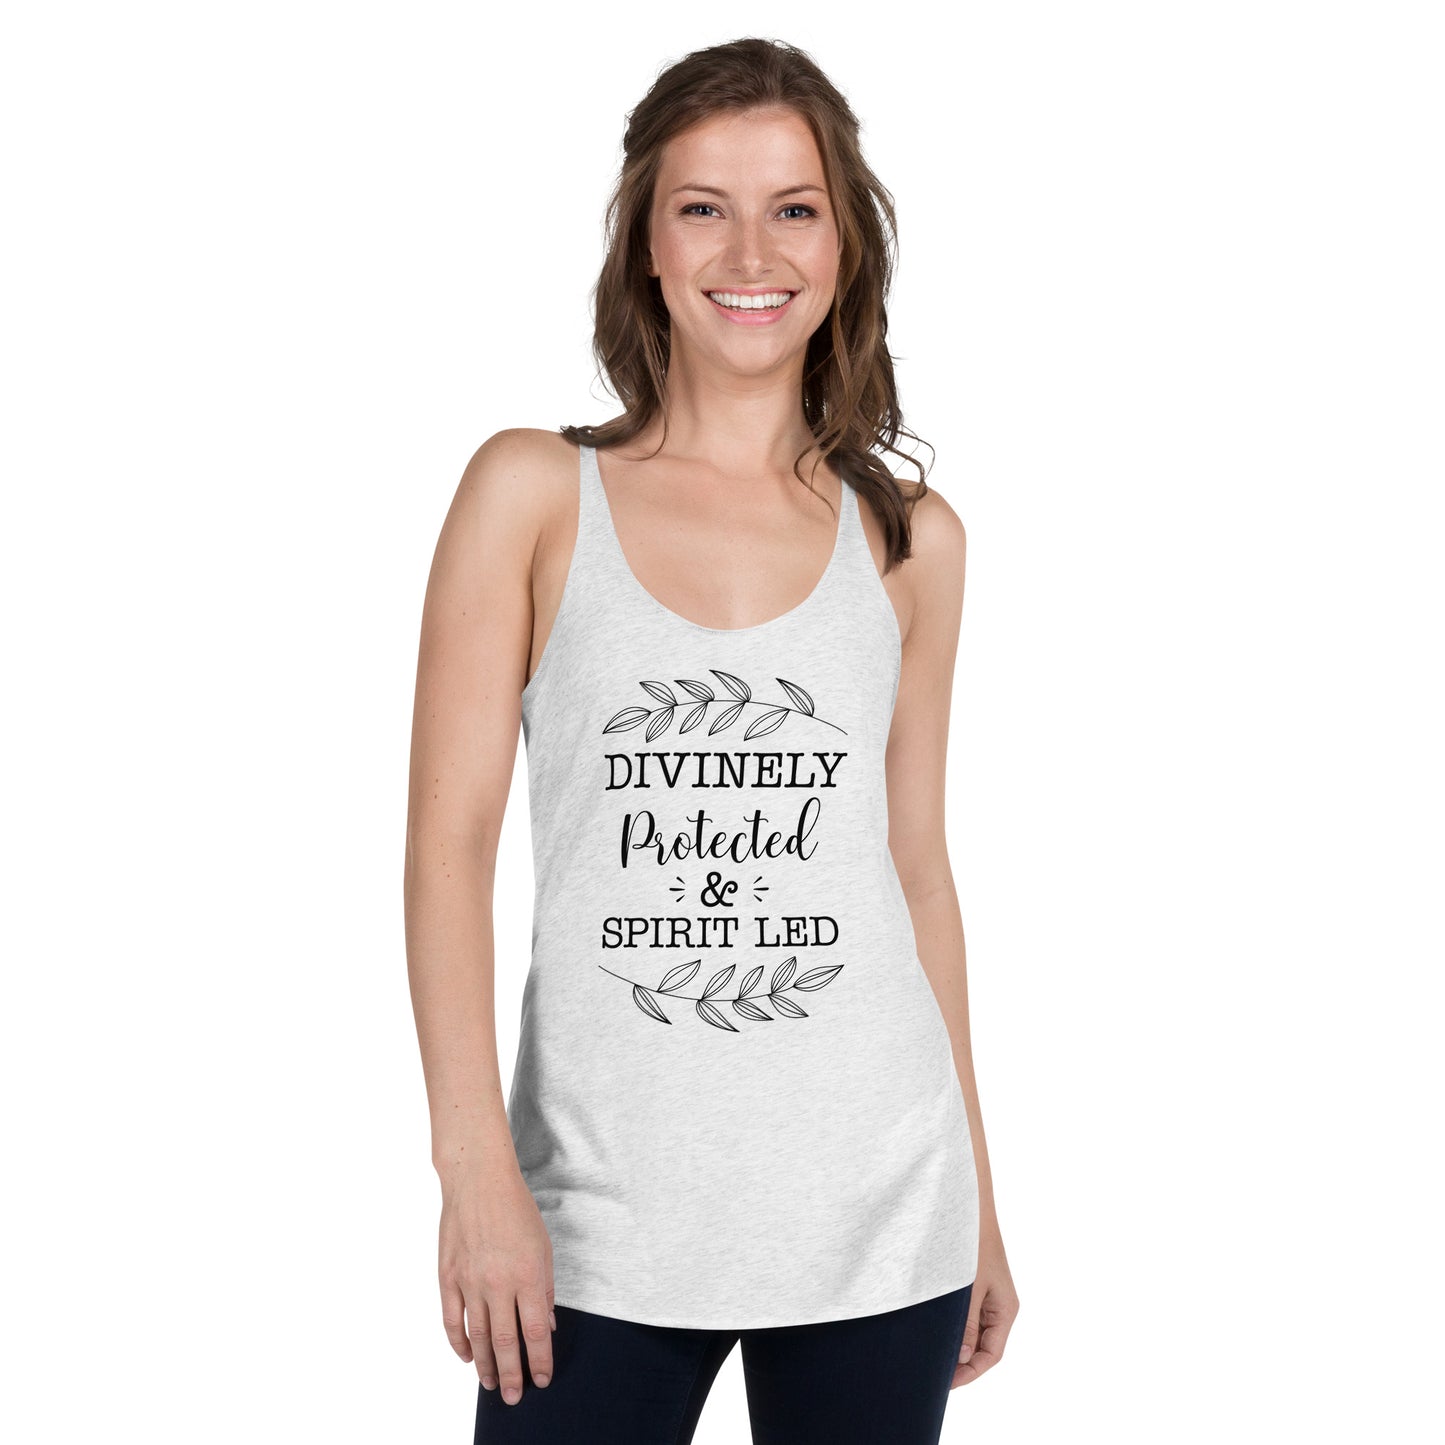 Divinely Protected Women's Racerback Tank